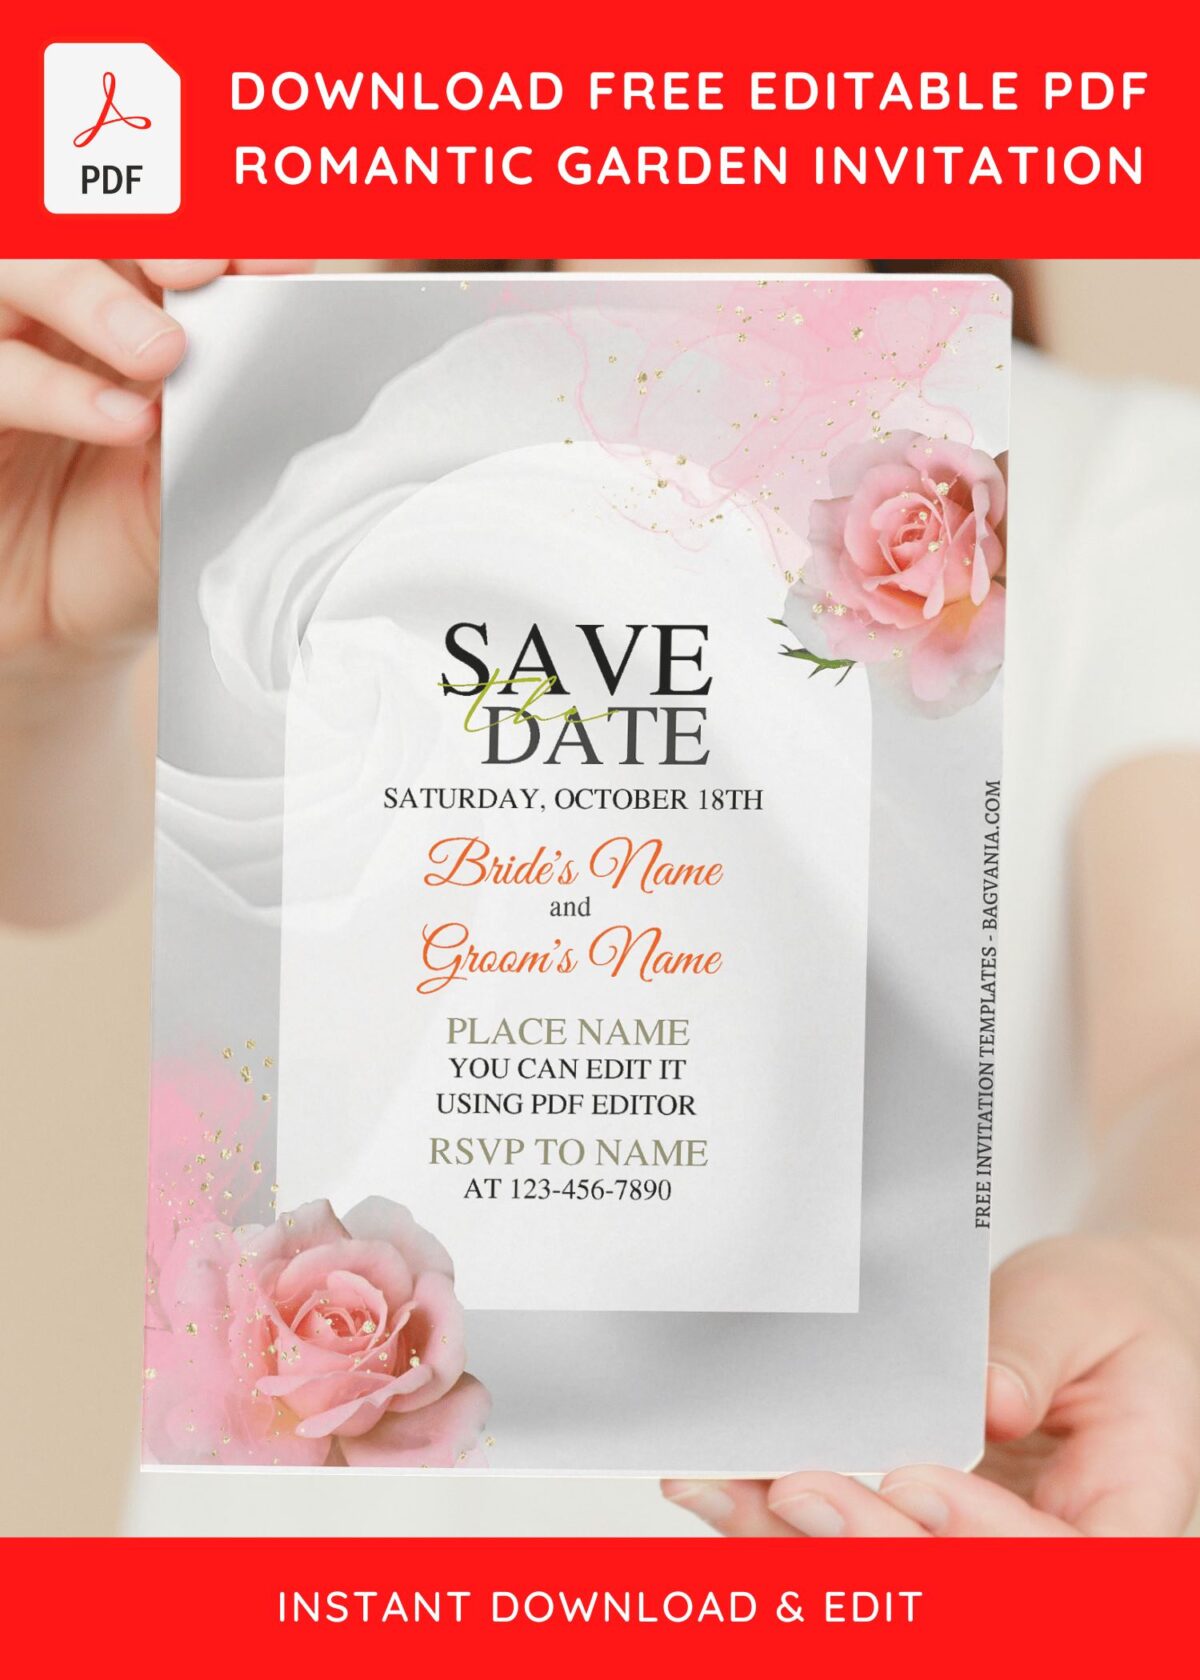 (Free Editable PDF) Beautiful In White Wedding Invitation Templates with editable text